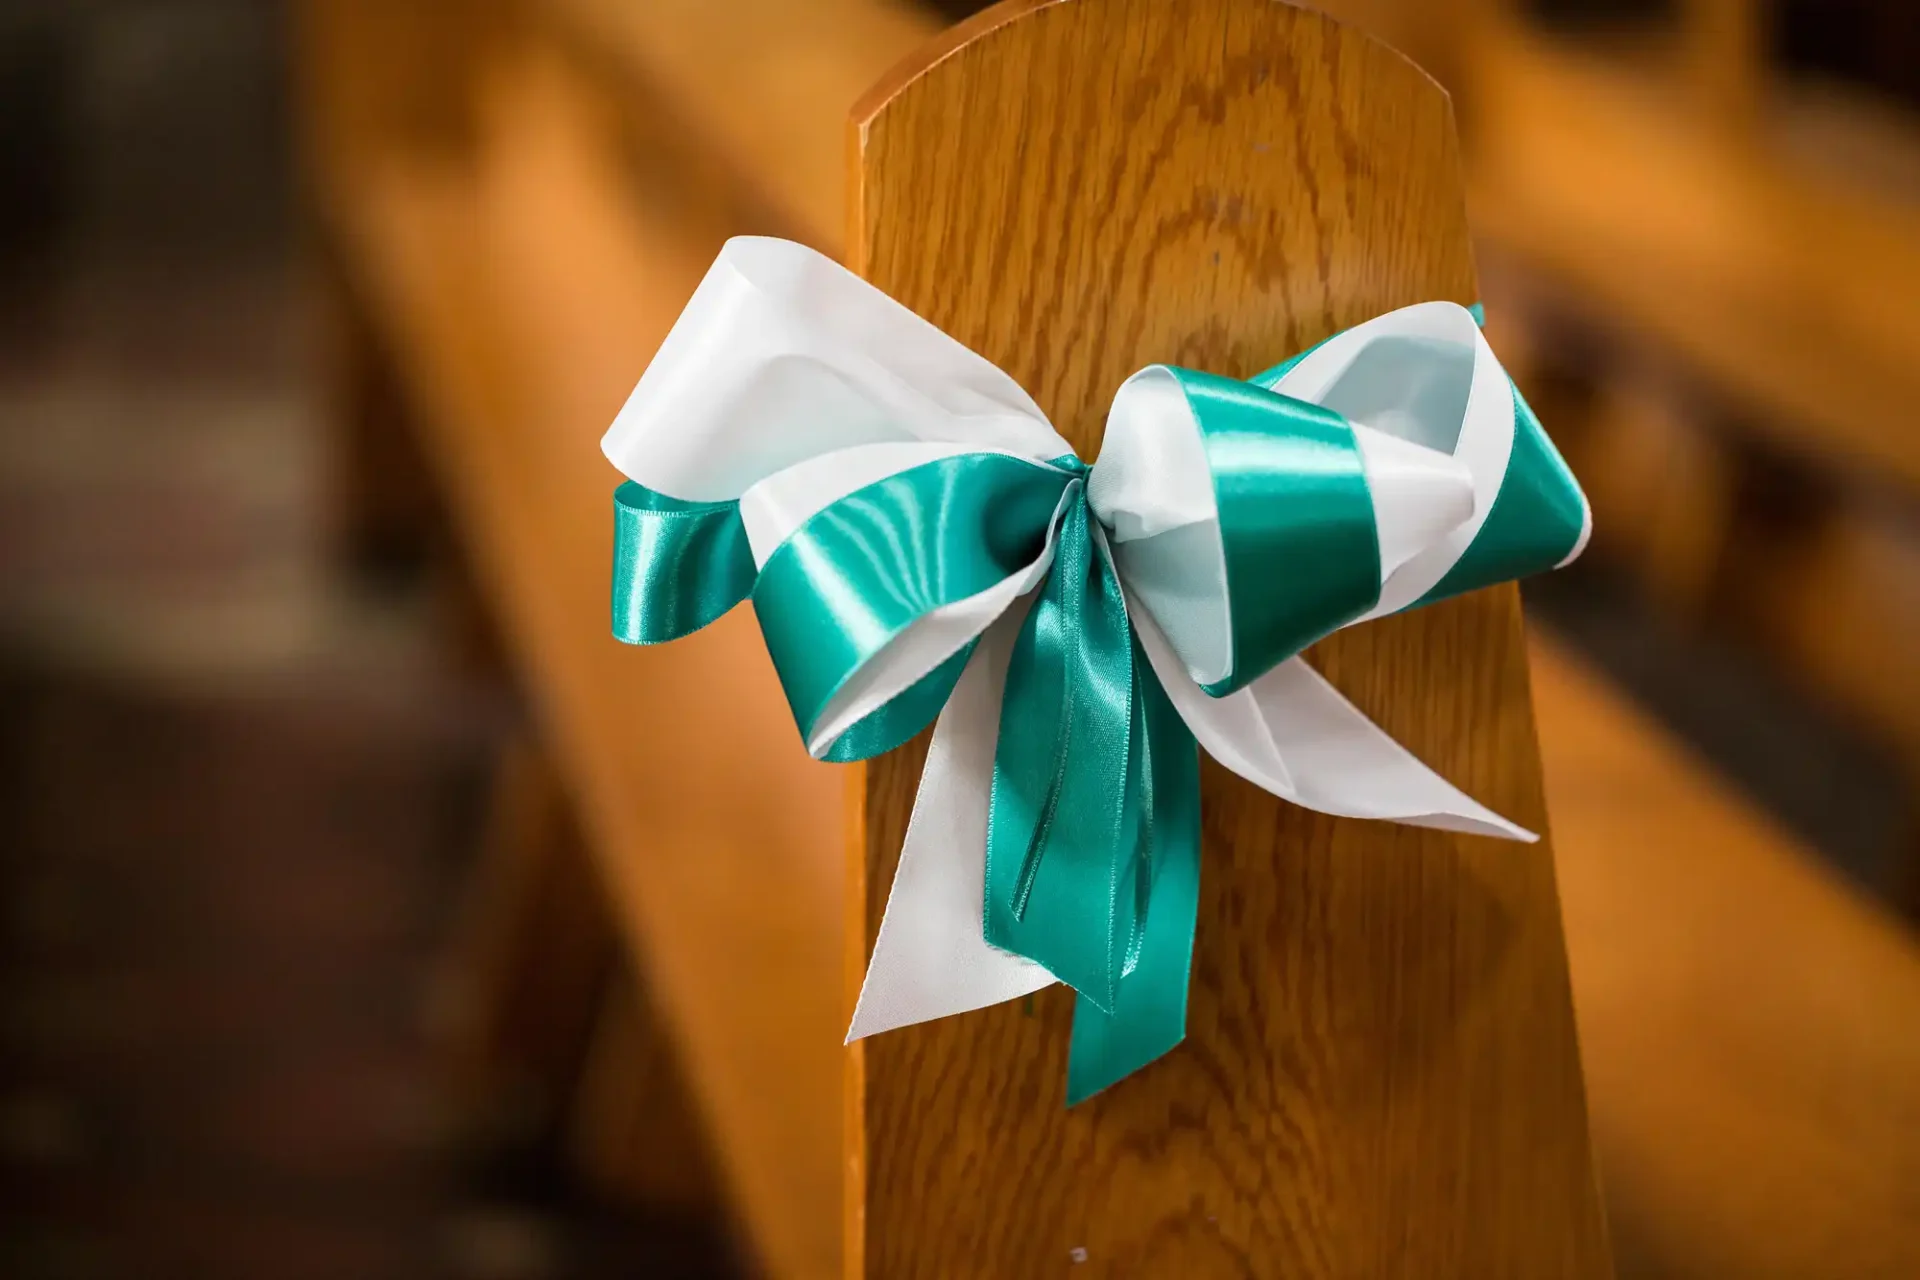 A teal and white ribbon bow tied around a wooden church pew.